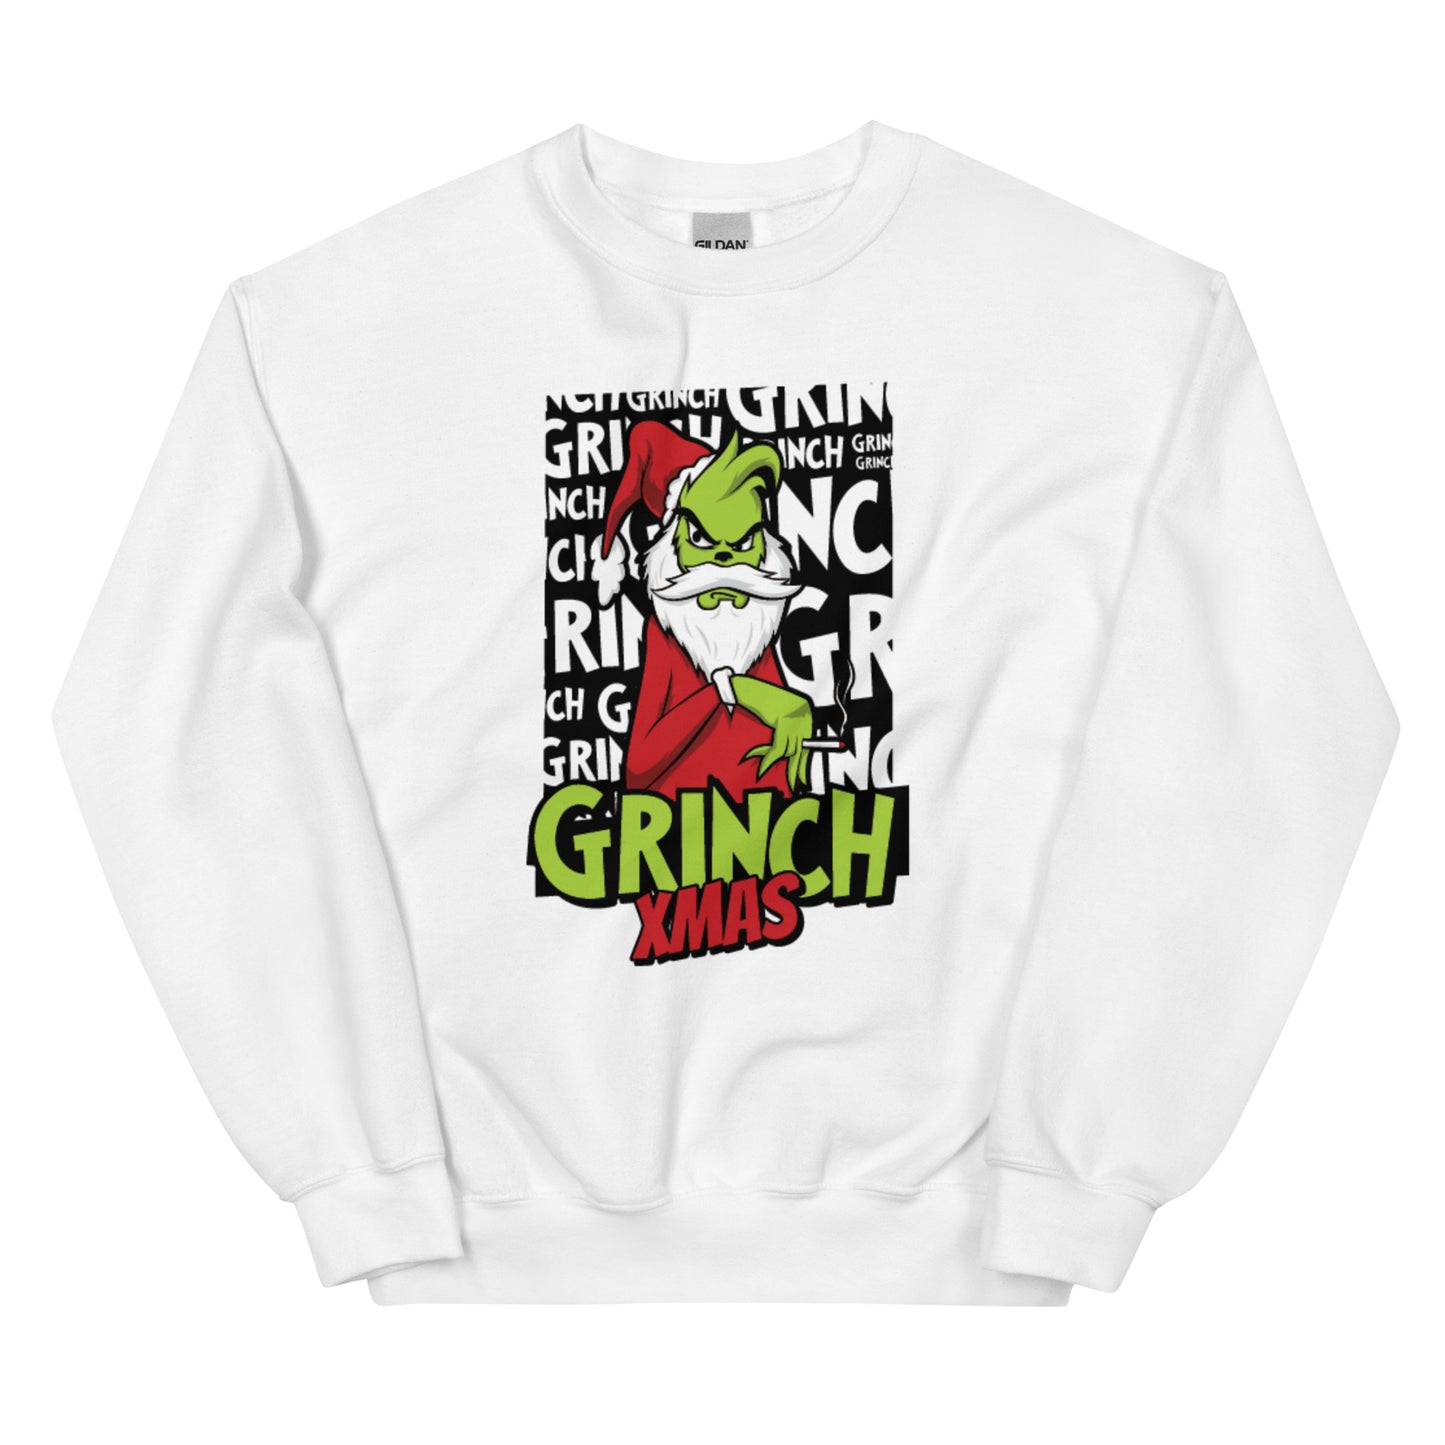 Grinch Xmas Unisex Sweatshirt - Embrace Your Inner Grinch with Festive Comfort | Holiday Cheer, Warmth, and Whimsy